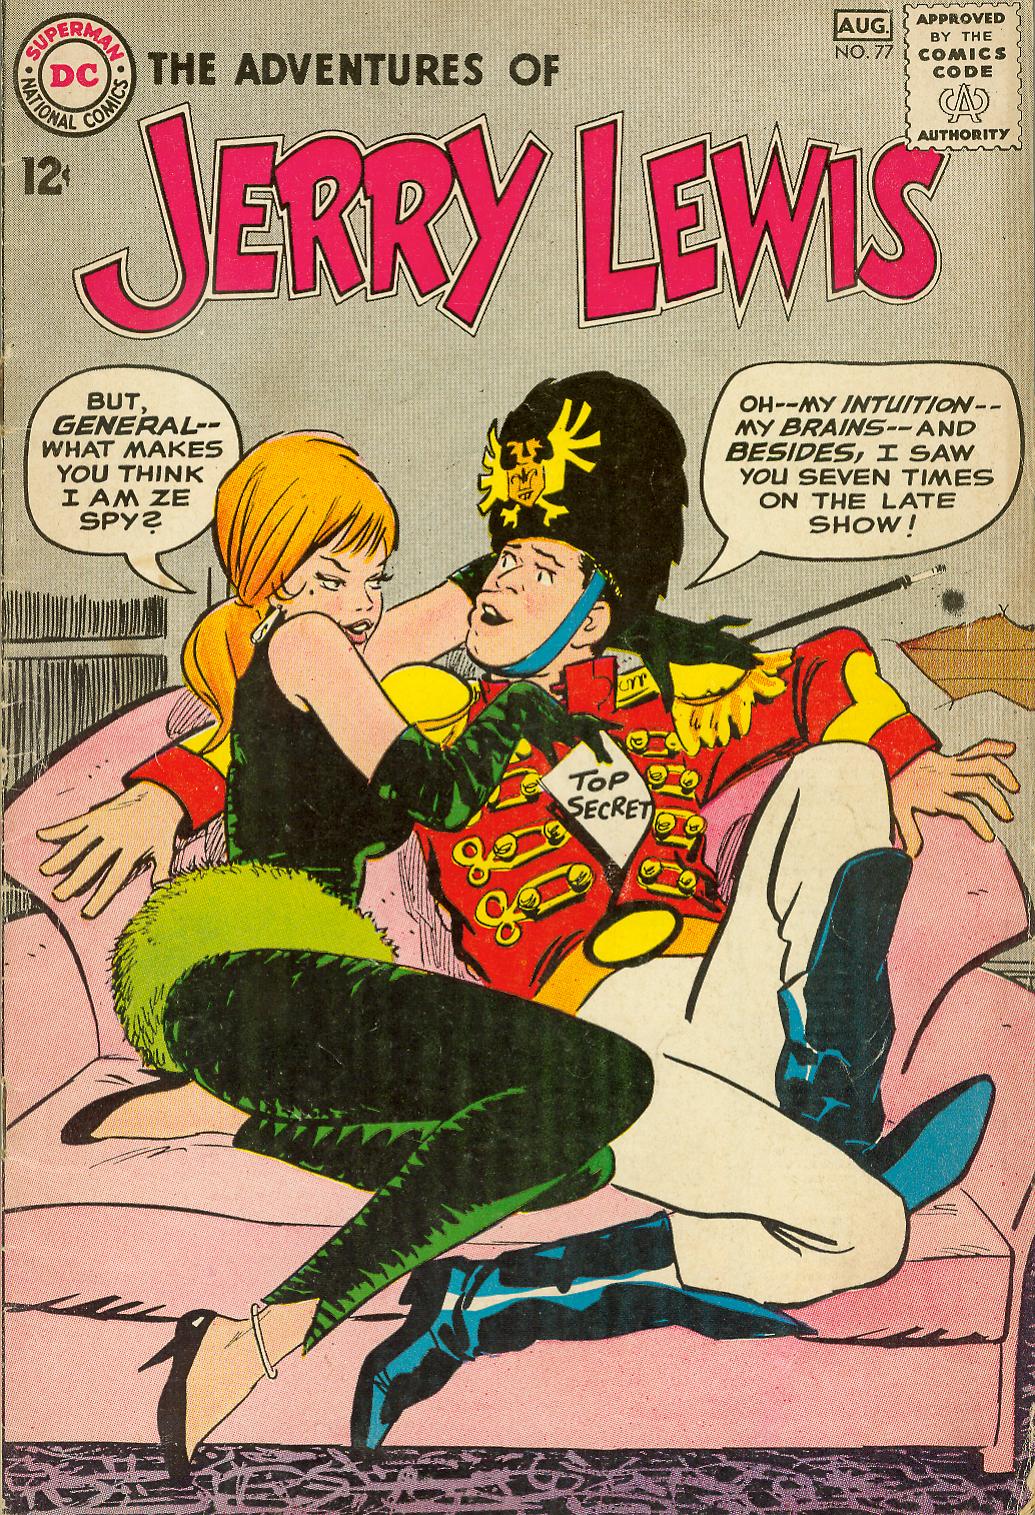 Read online The Adventures of Jerry Lewis comic -  Issue #77 - 1